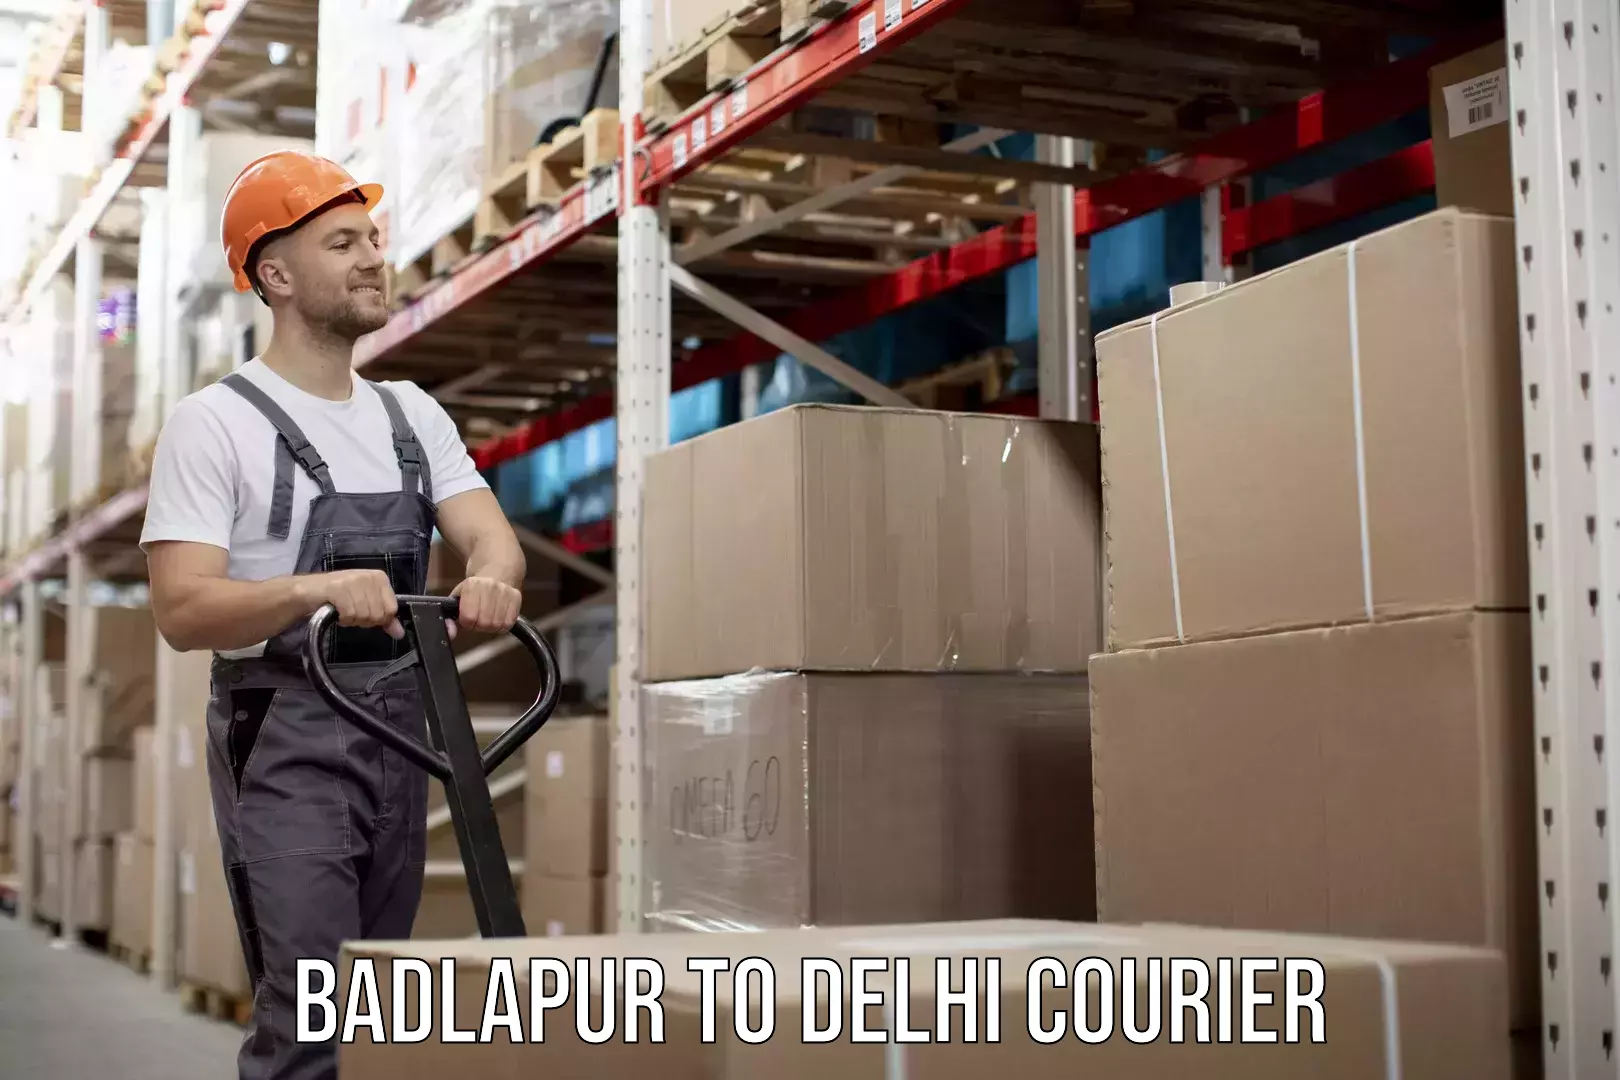 Package delivery network Badlapur to Delhi